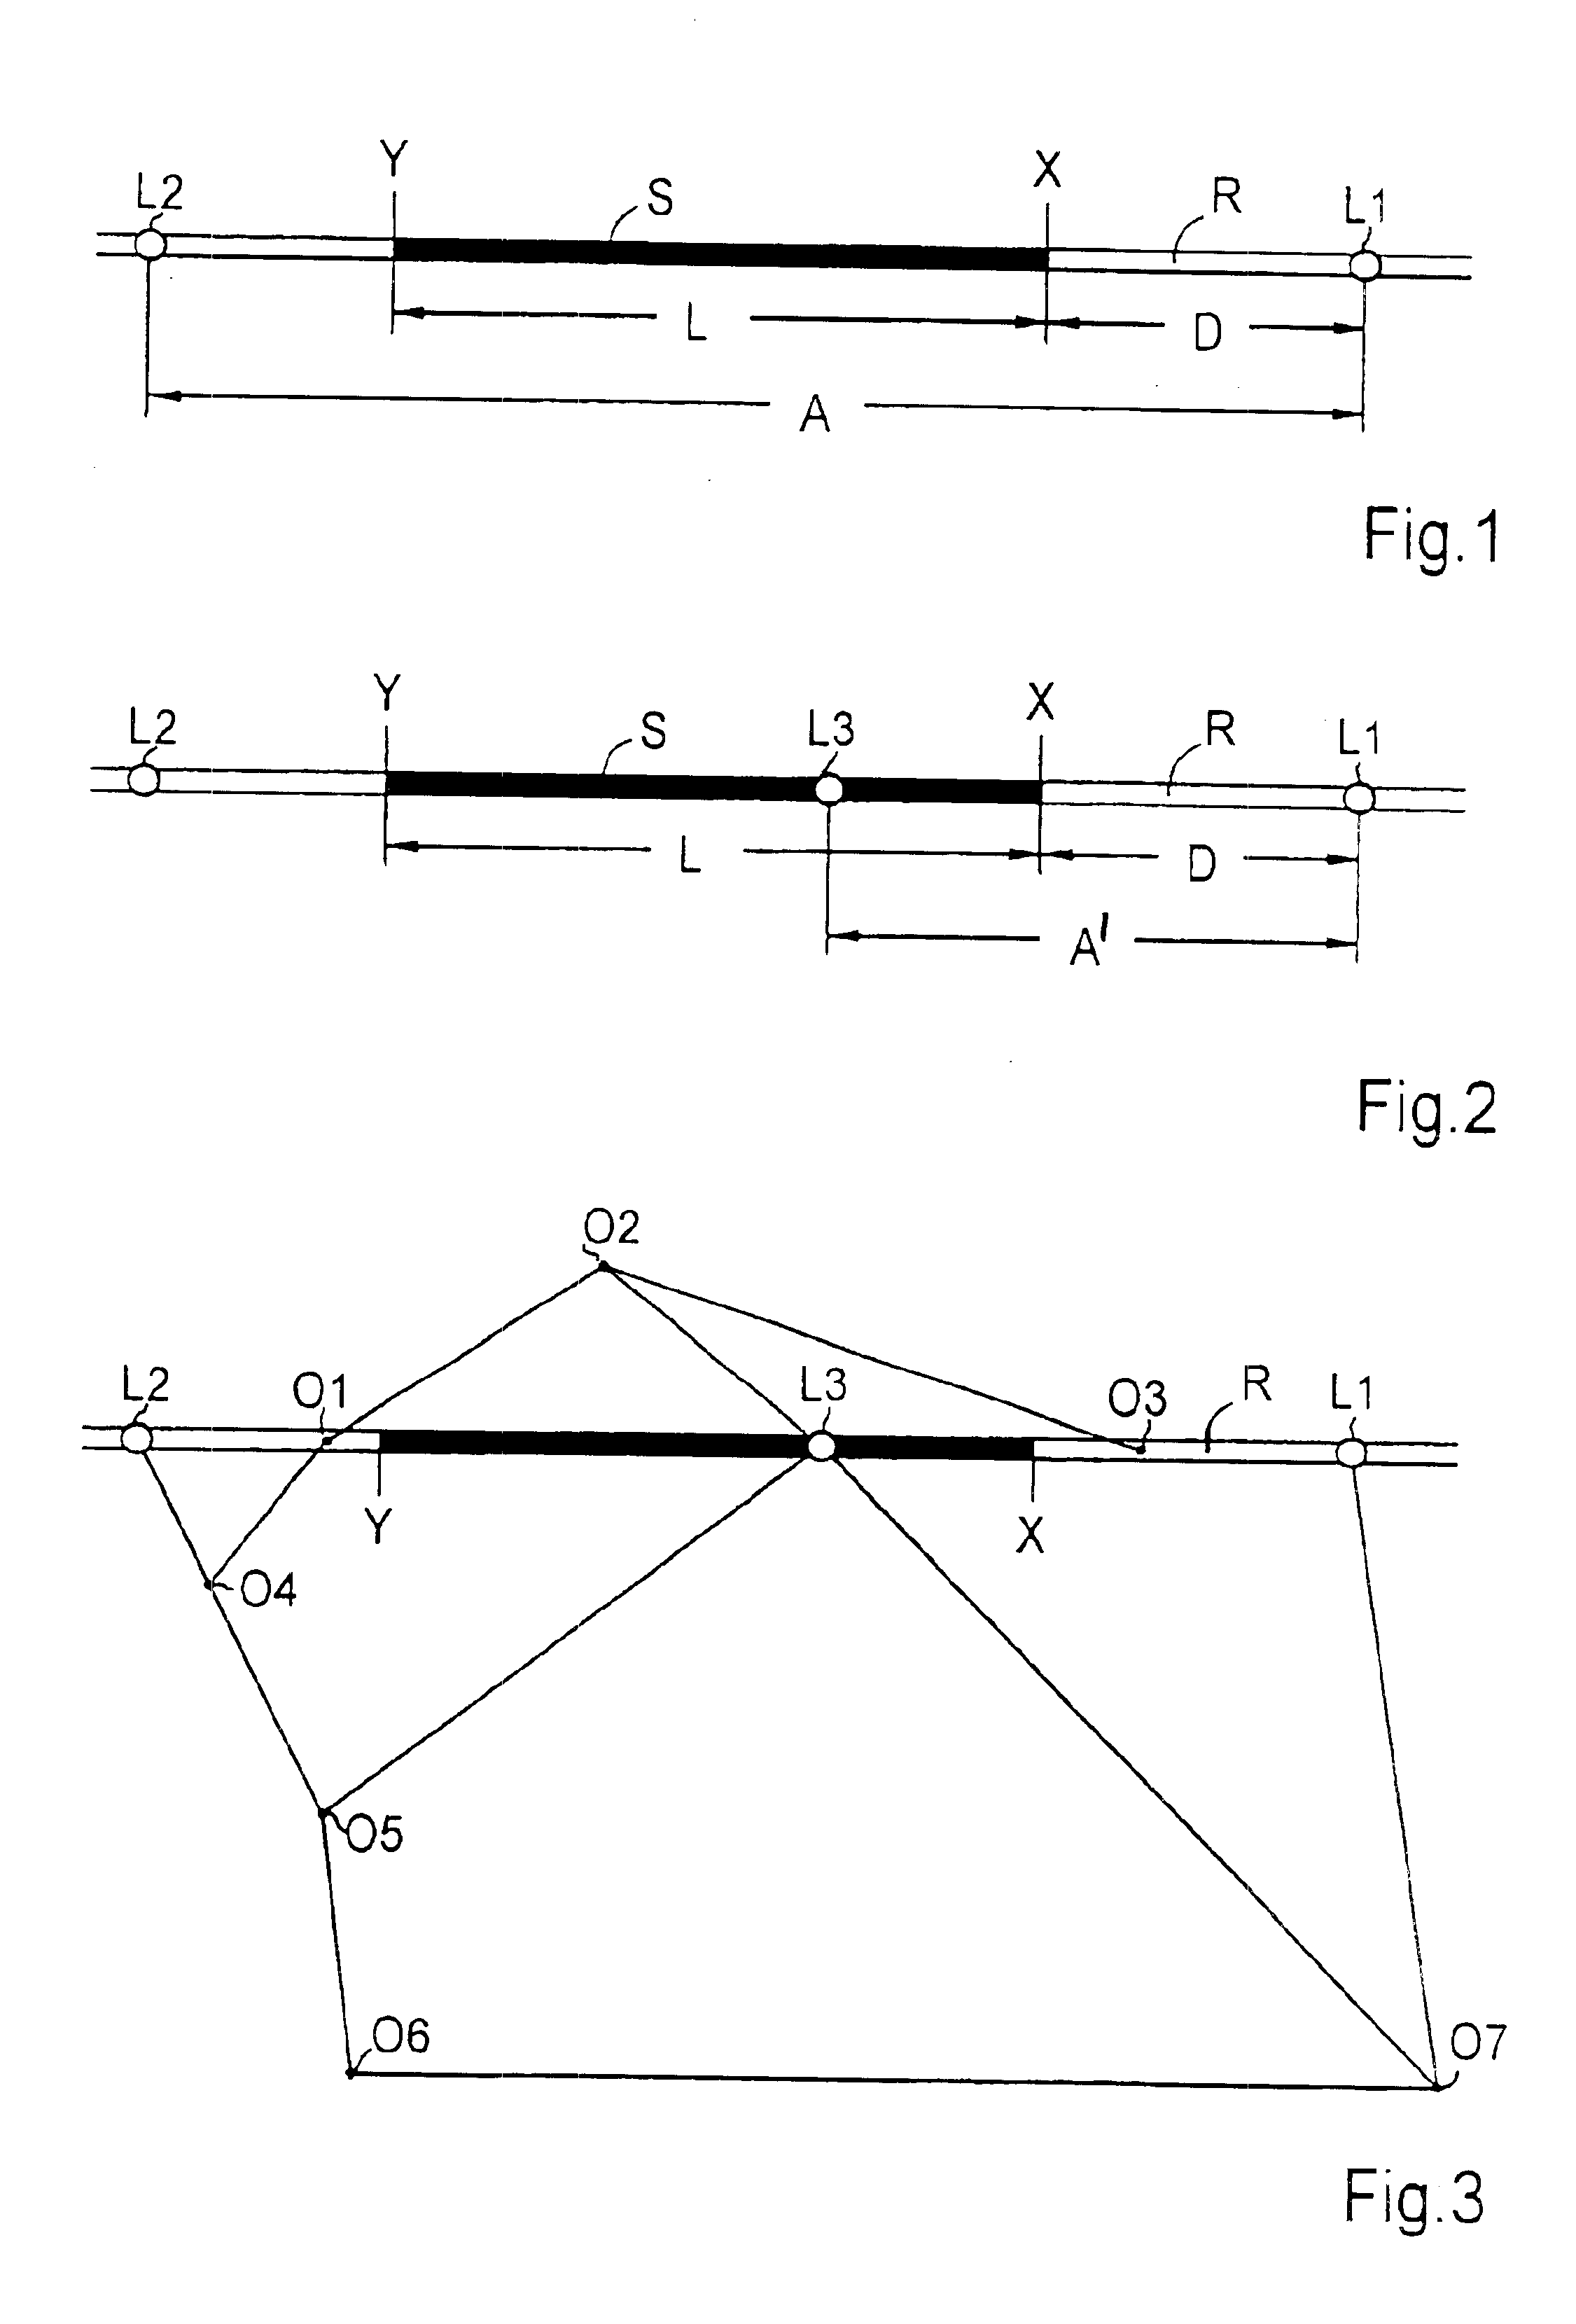 Method for transmitting traffic information about a traffic obstruction